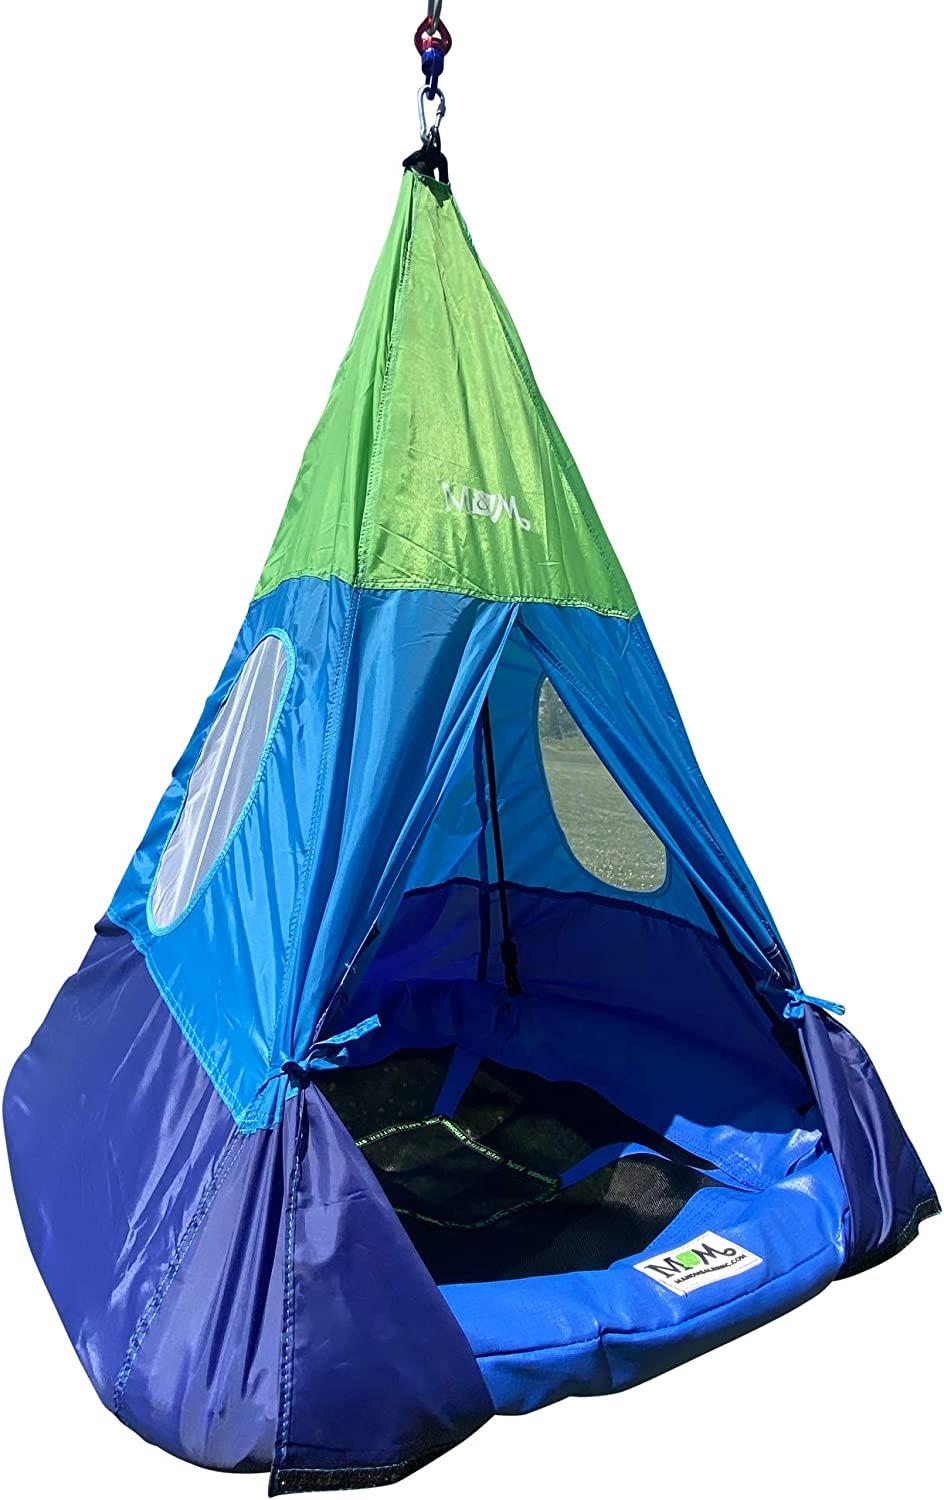 Outdoor Teepee Tent Swing, 40in Textilene Platform Swing, Colorful Detachable Tent, Hanging Tree Fort, 250 Lbs., Single or Multi-Rider, Swing and Spin.